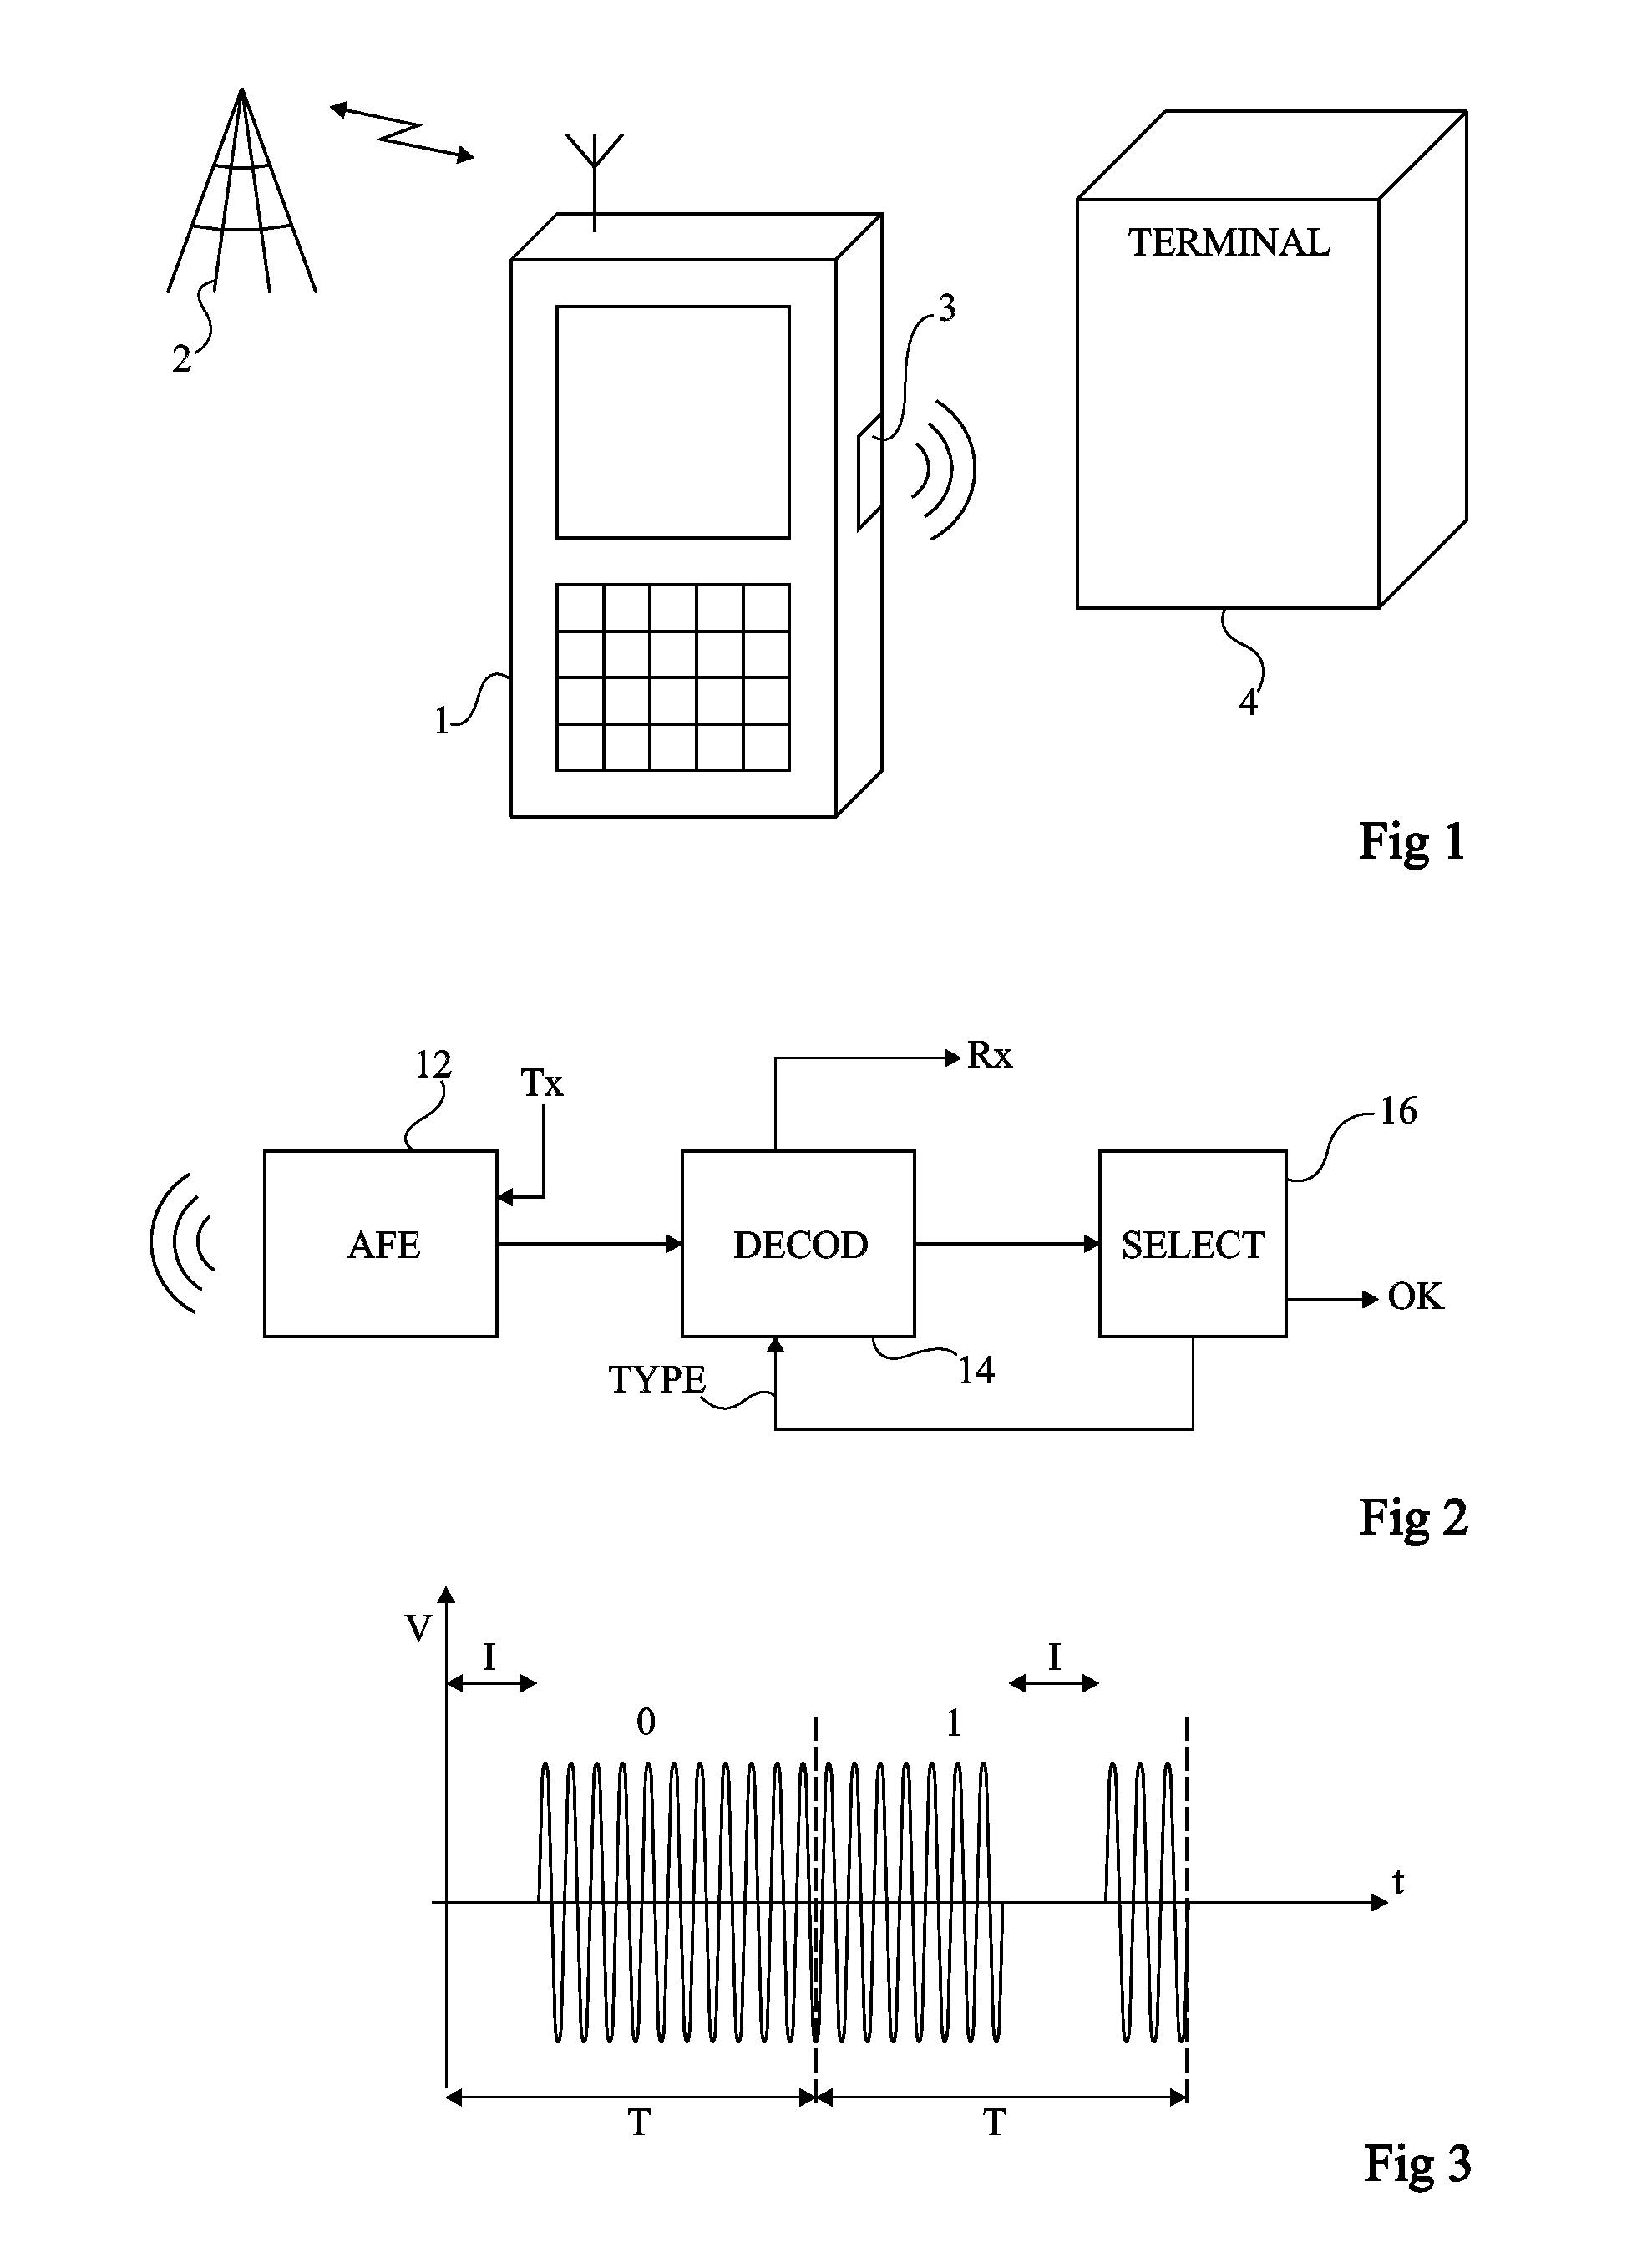 Configuration of a near-field communication router according to the modulation type